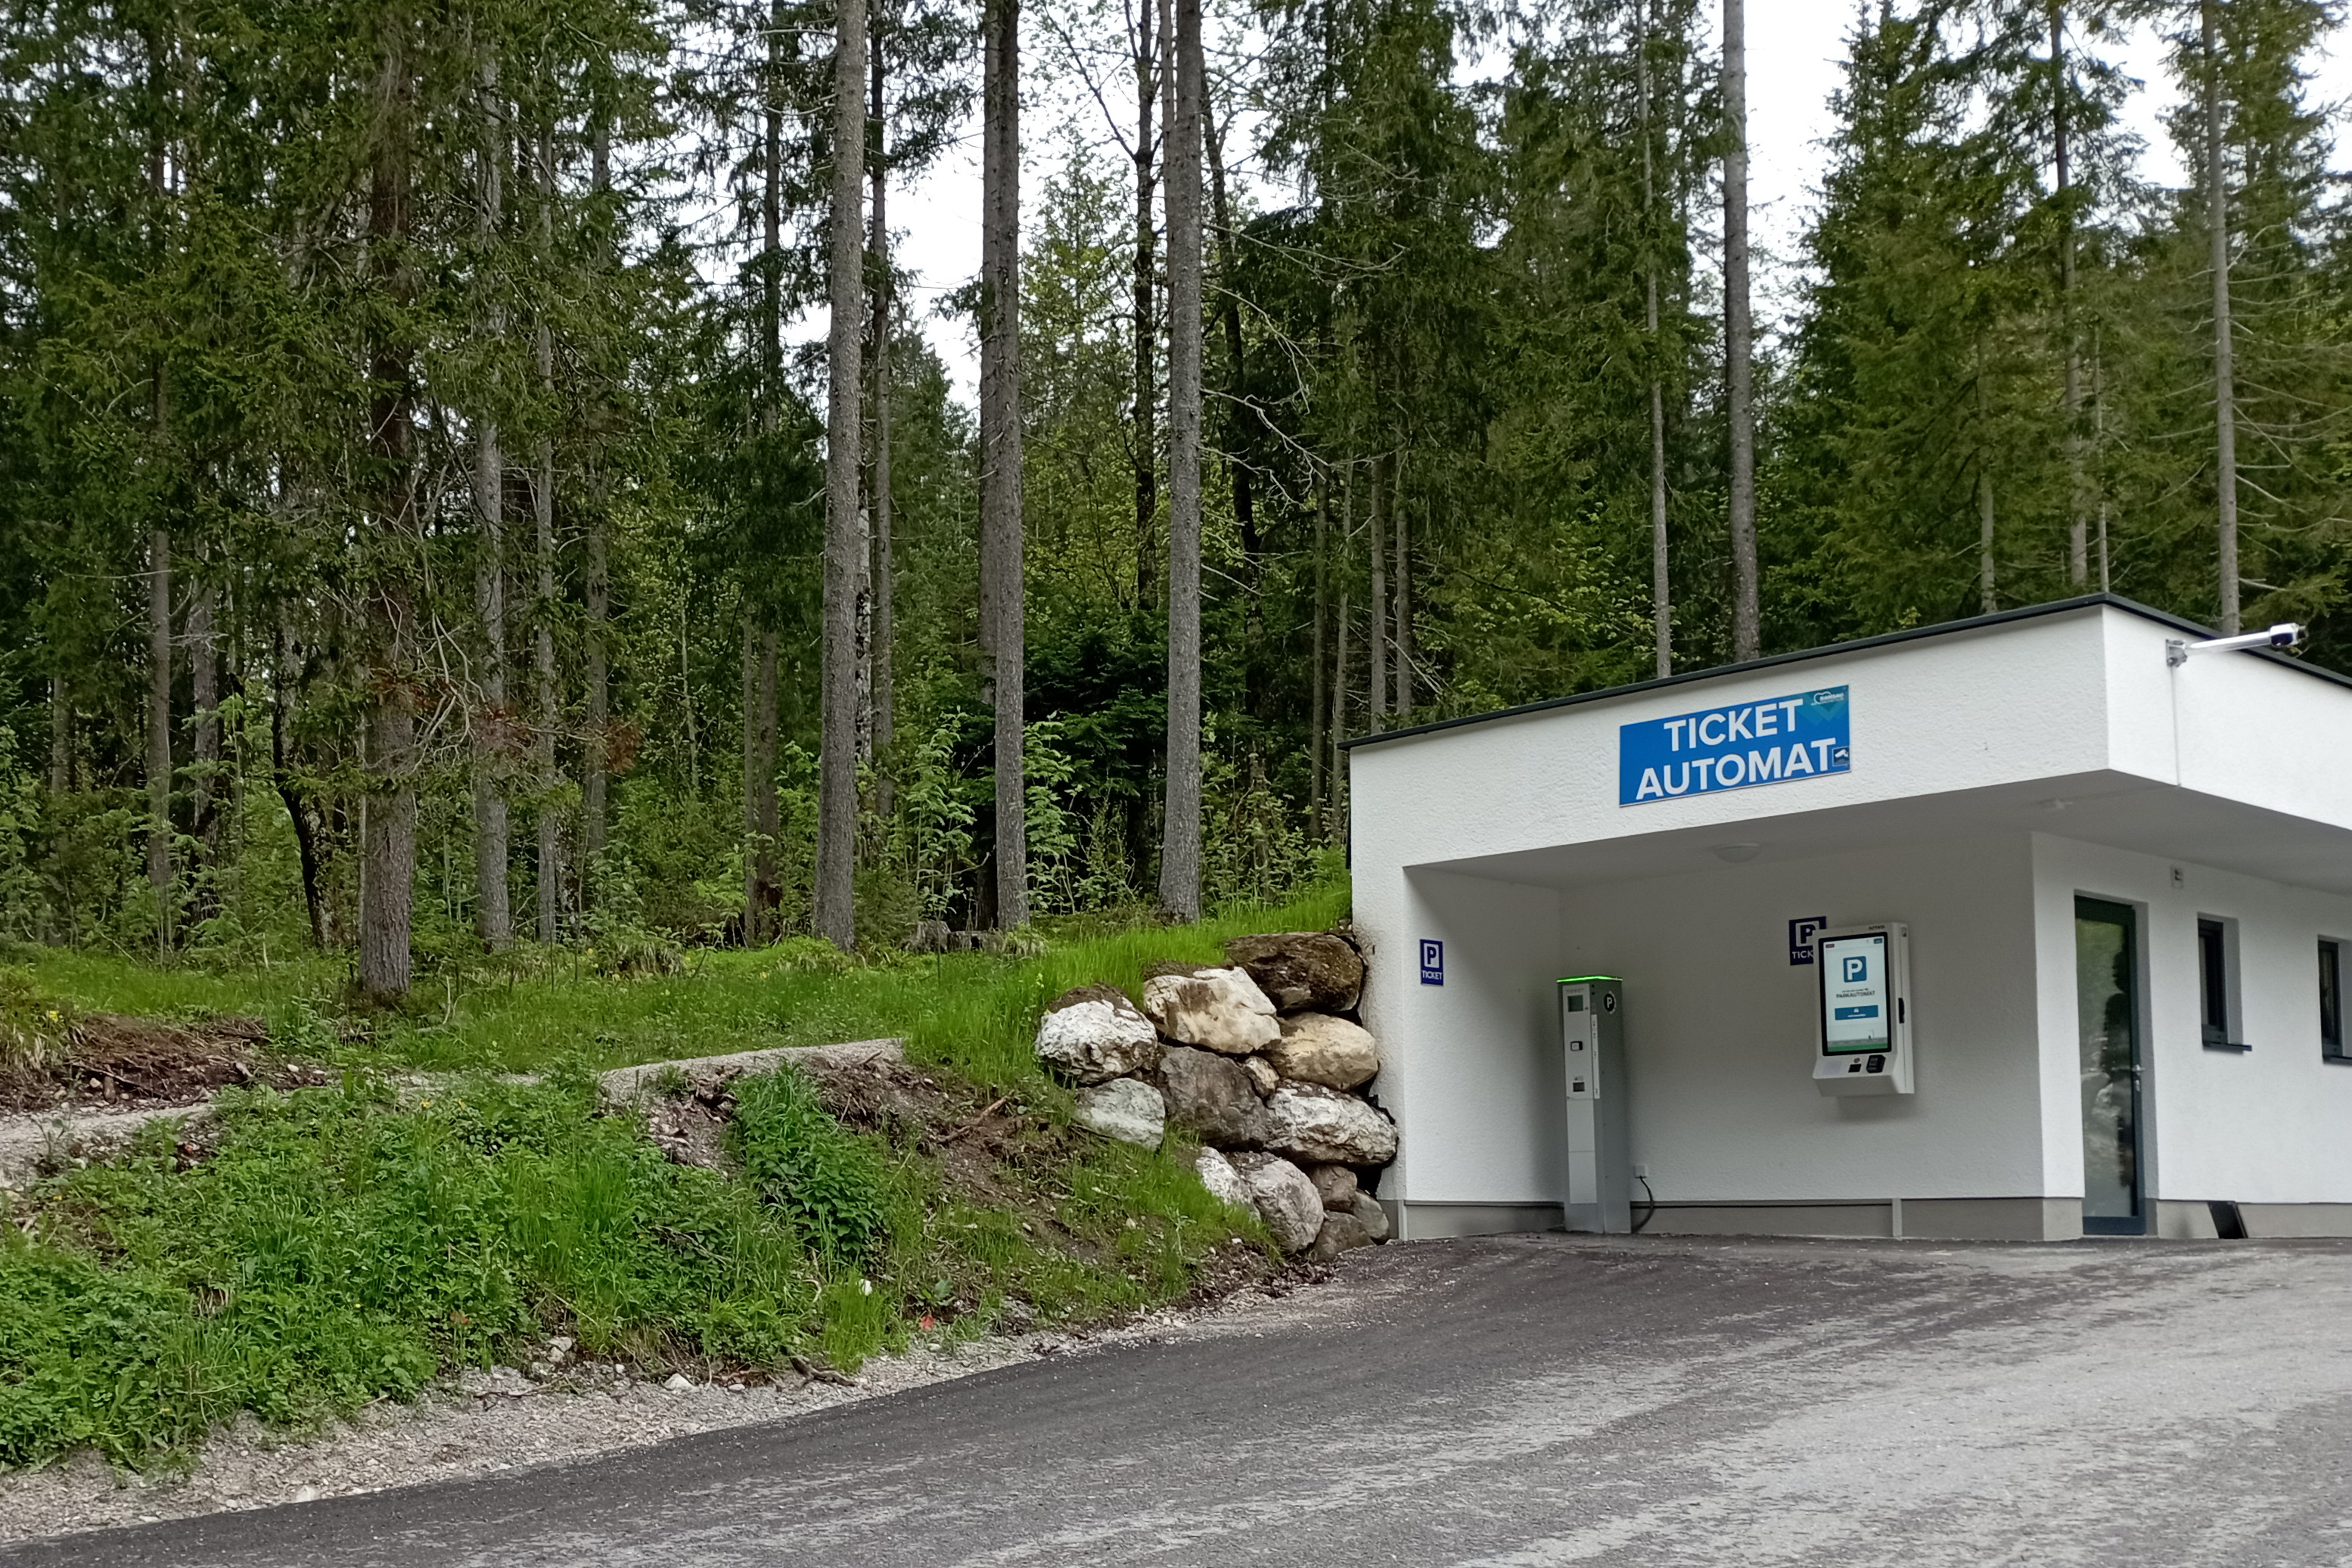 The Arivo parking system in use at the parking lot near the old mill in Ramsau (Austria)